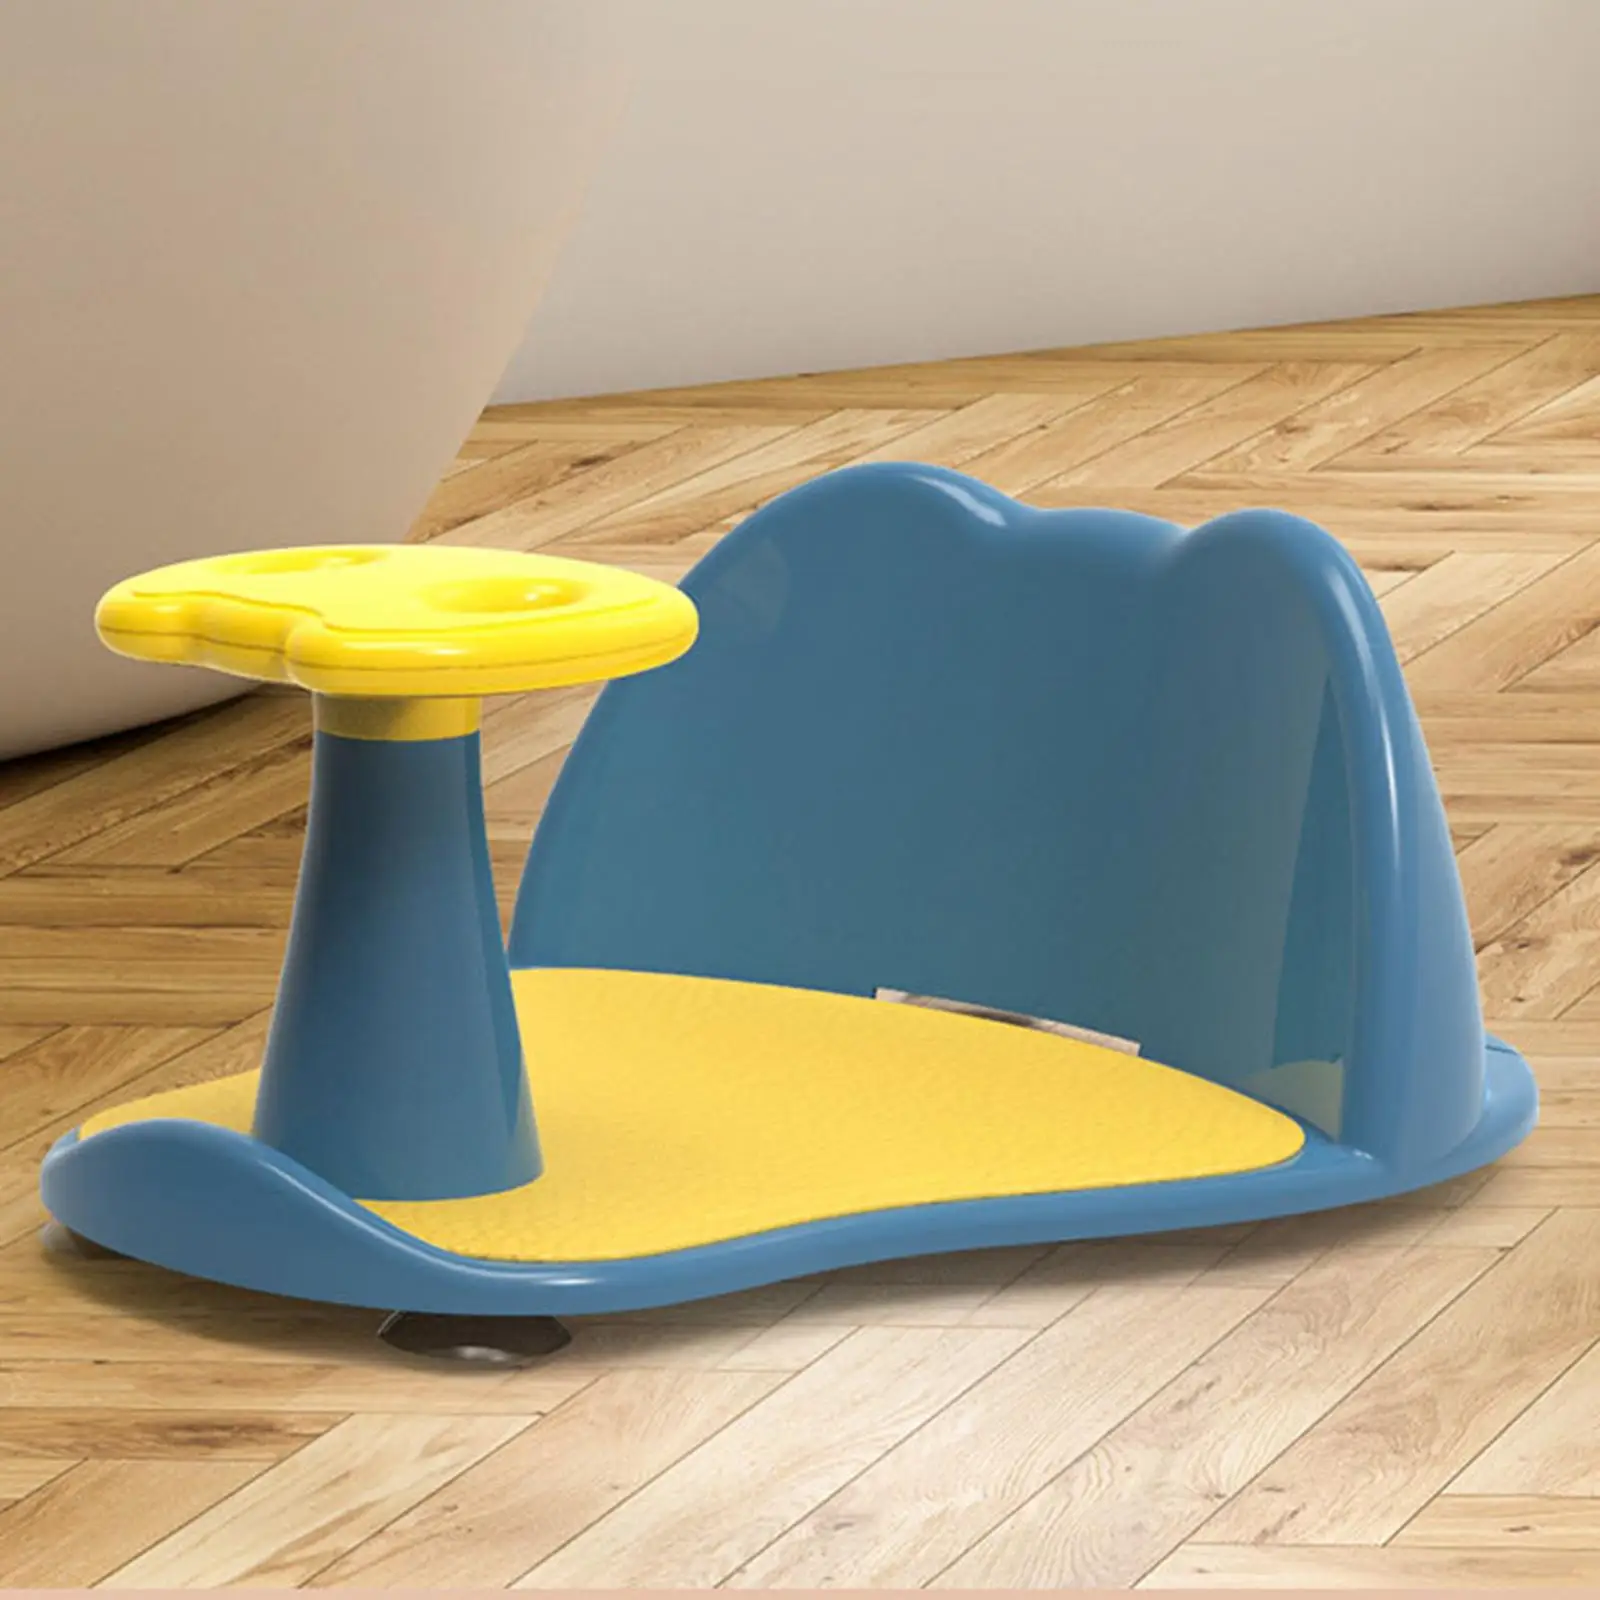 Contoured  Seat Open-Side  Drain Holes Seat Tub   Bathtub Seat for Babies SitBathing in the Sink Counter